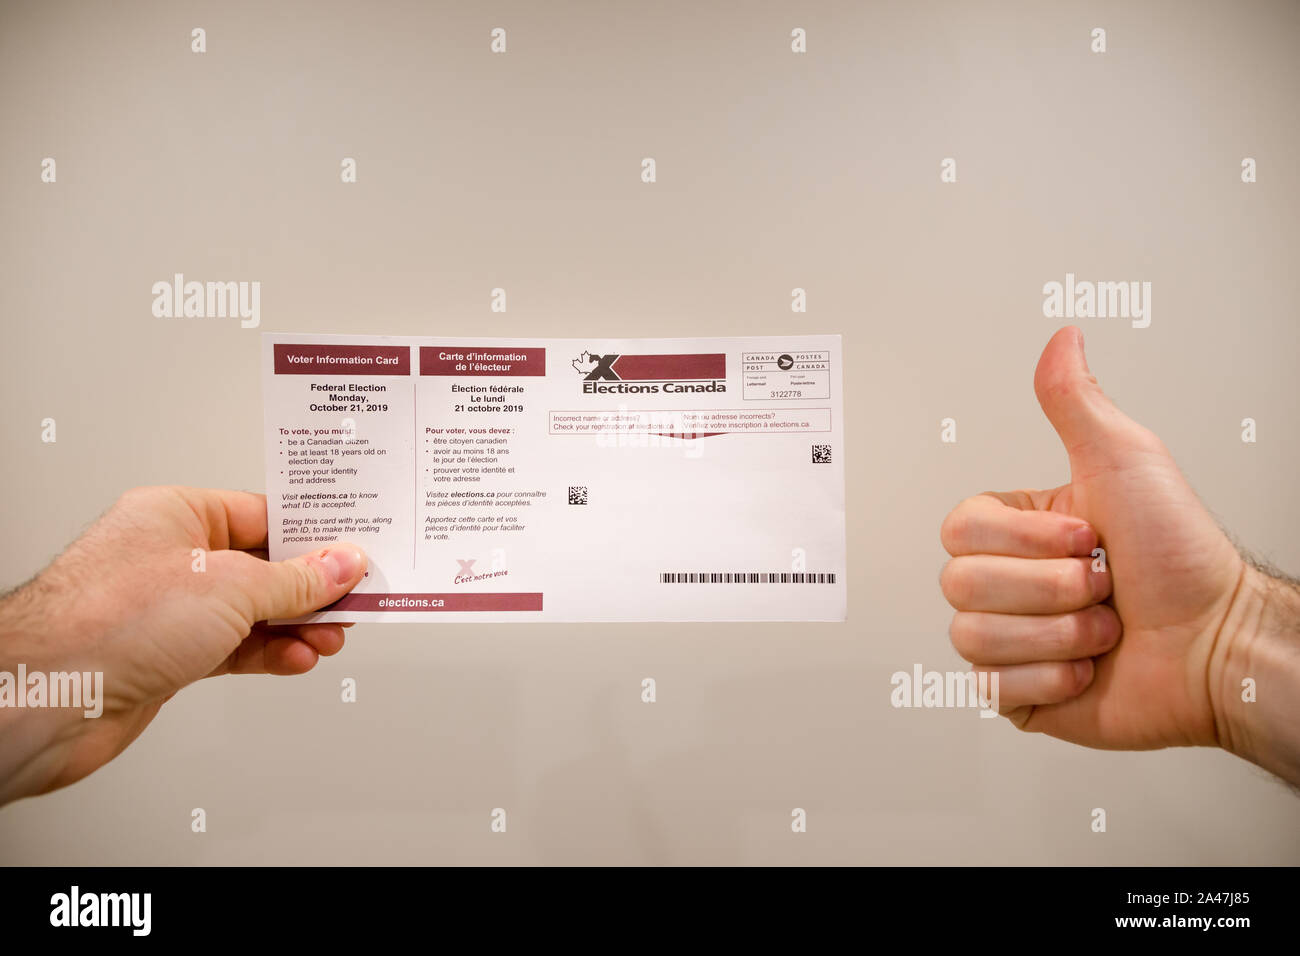 NORTH VANCOUVER, BC, CANADA - OCT 11, 2019: A voter information card for the 2019 Canadian Federal Election which takes place on Oct 21, 2019 with a Stock Photo